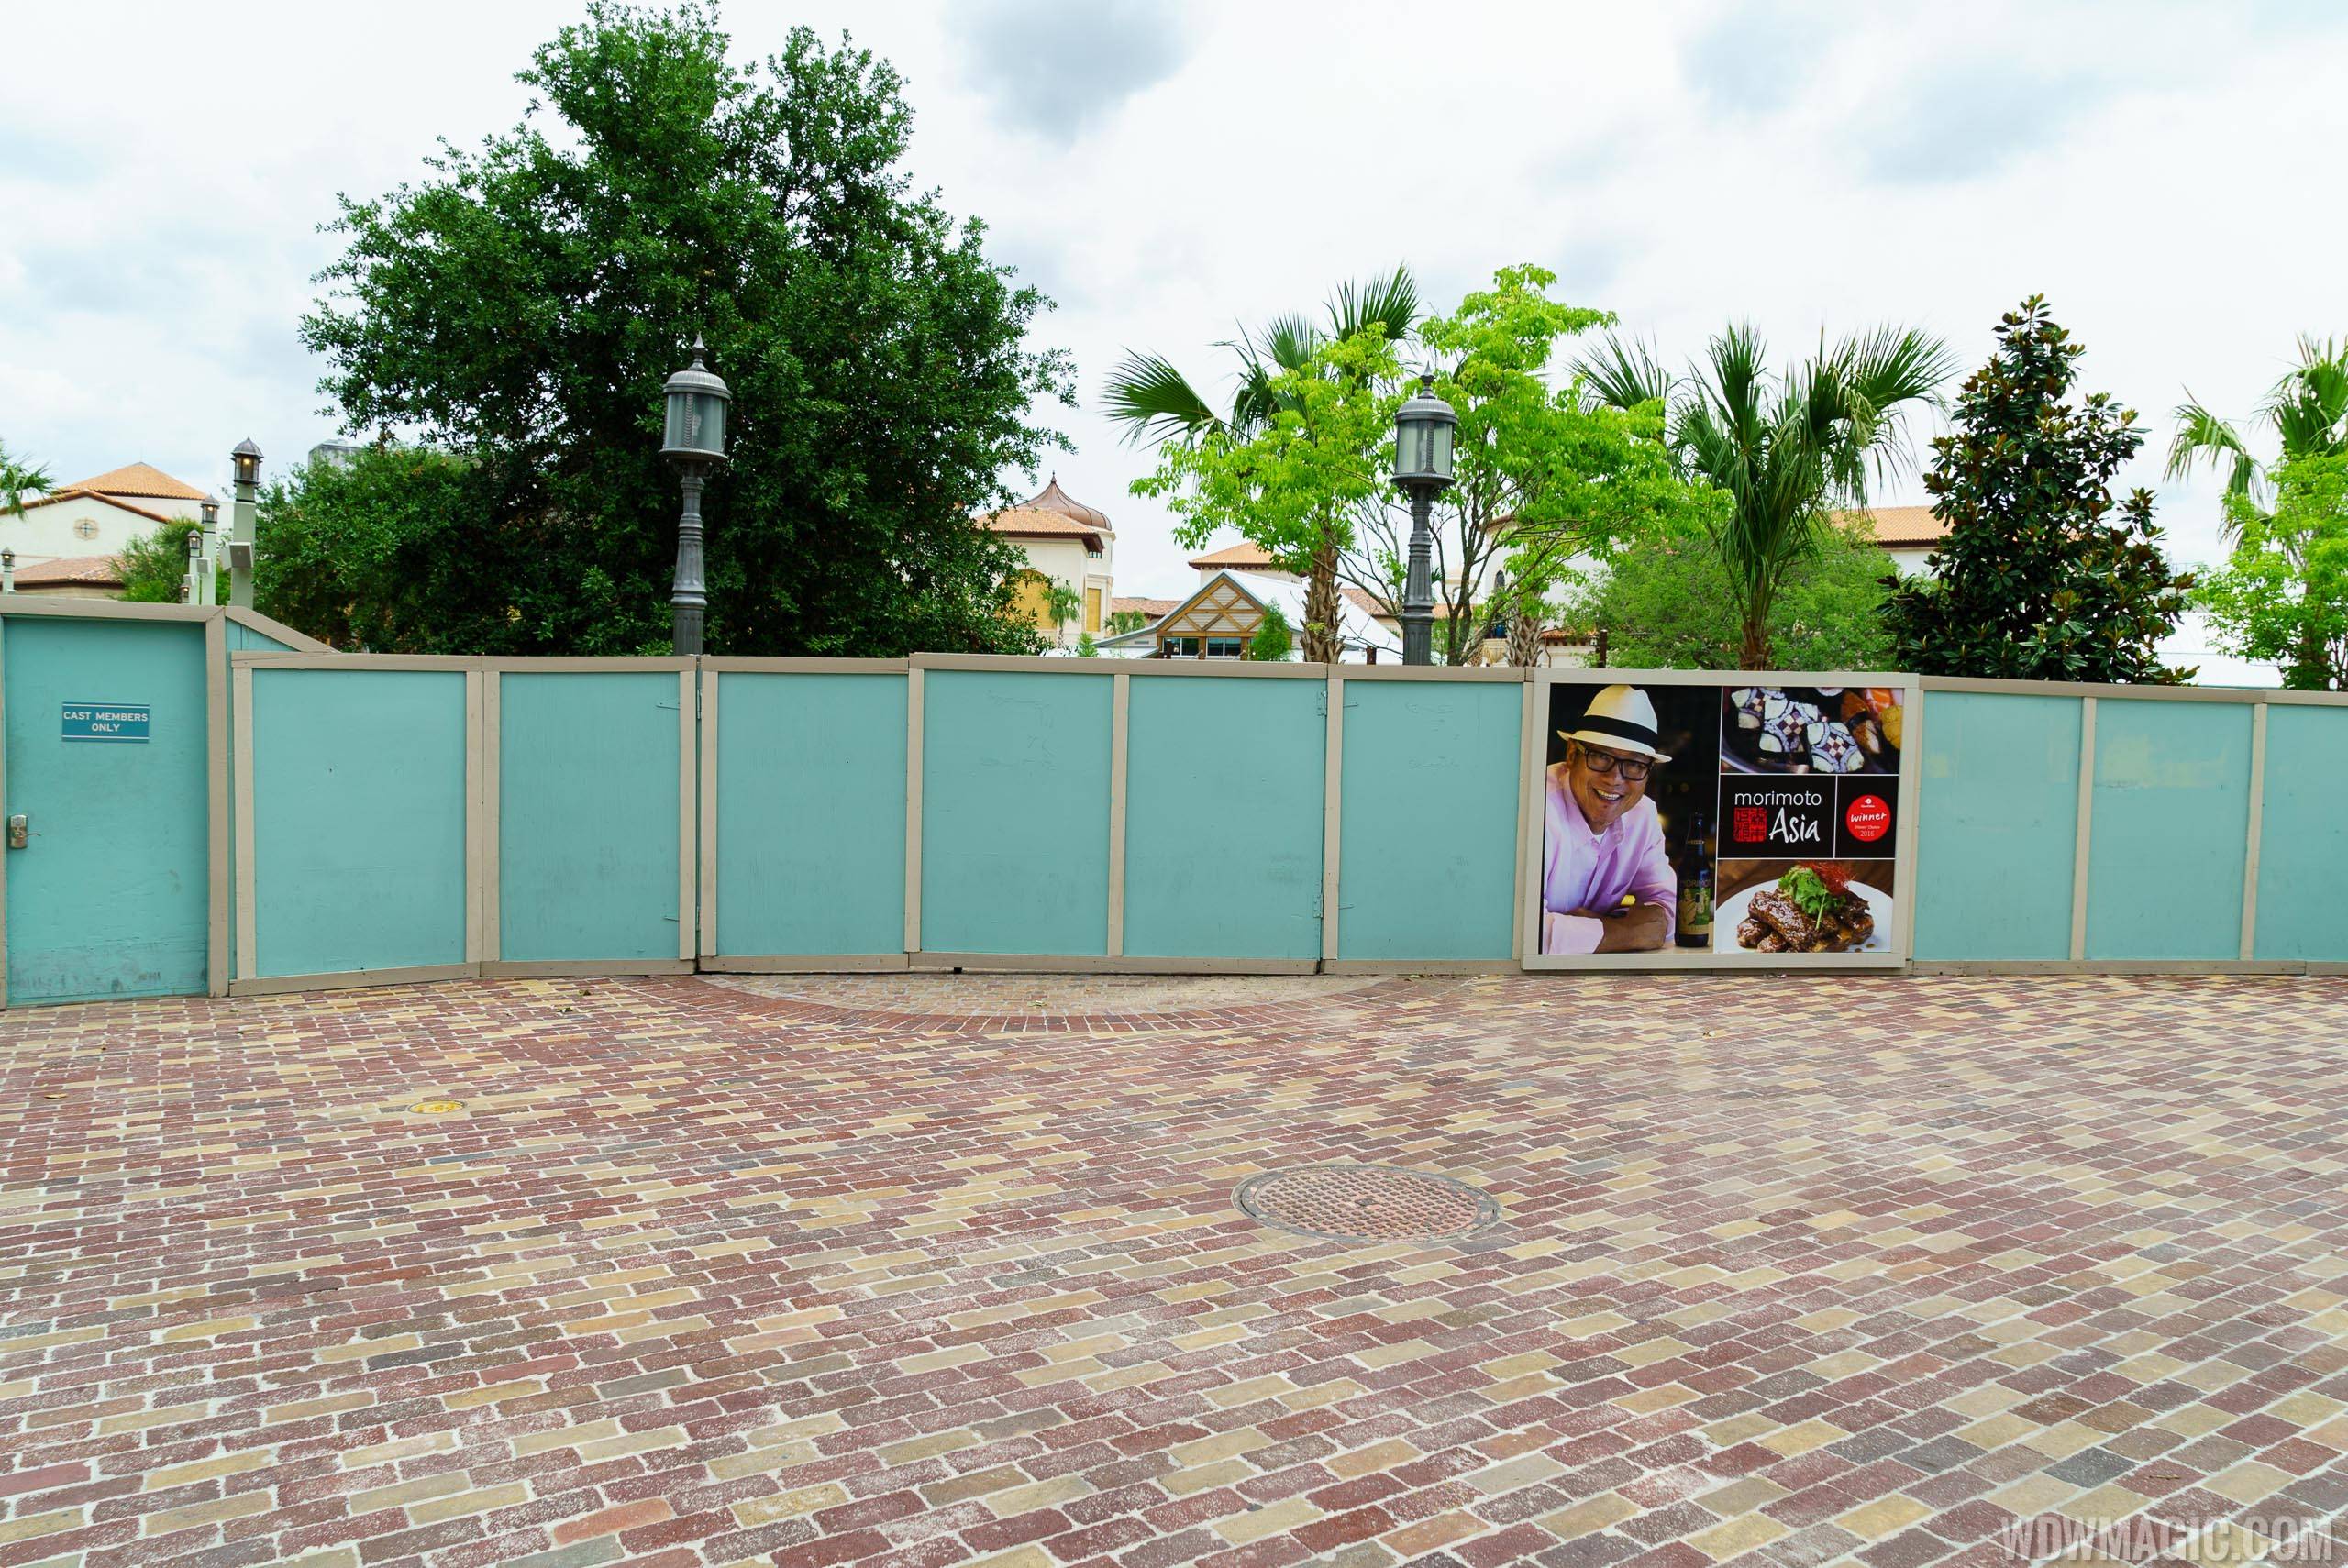 Construction walls down along The Spring at the Town Center